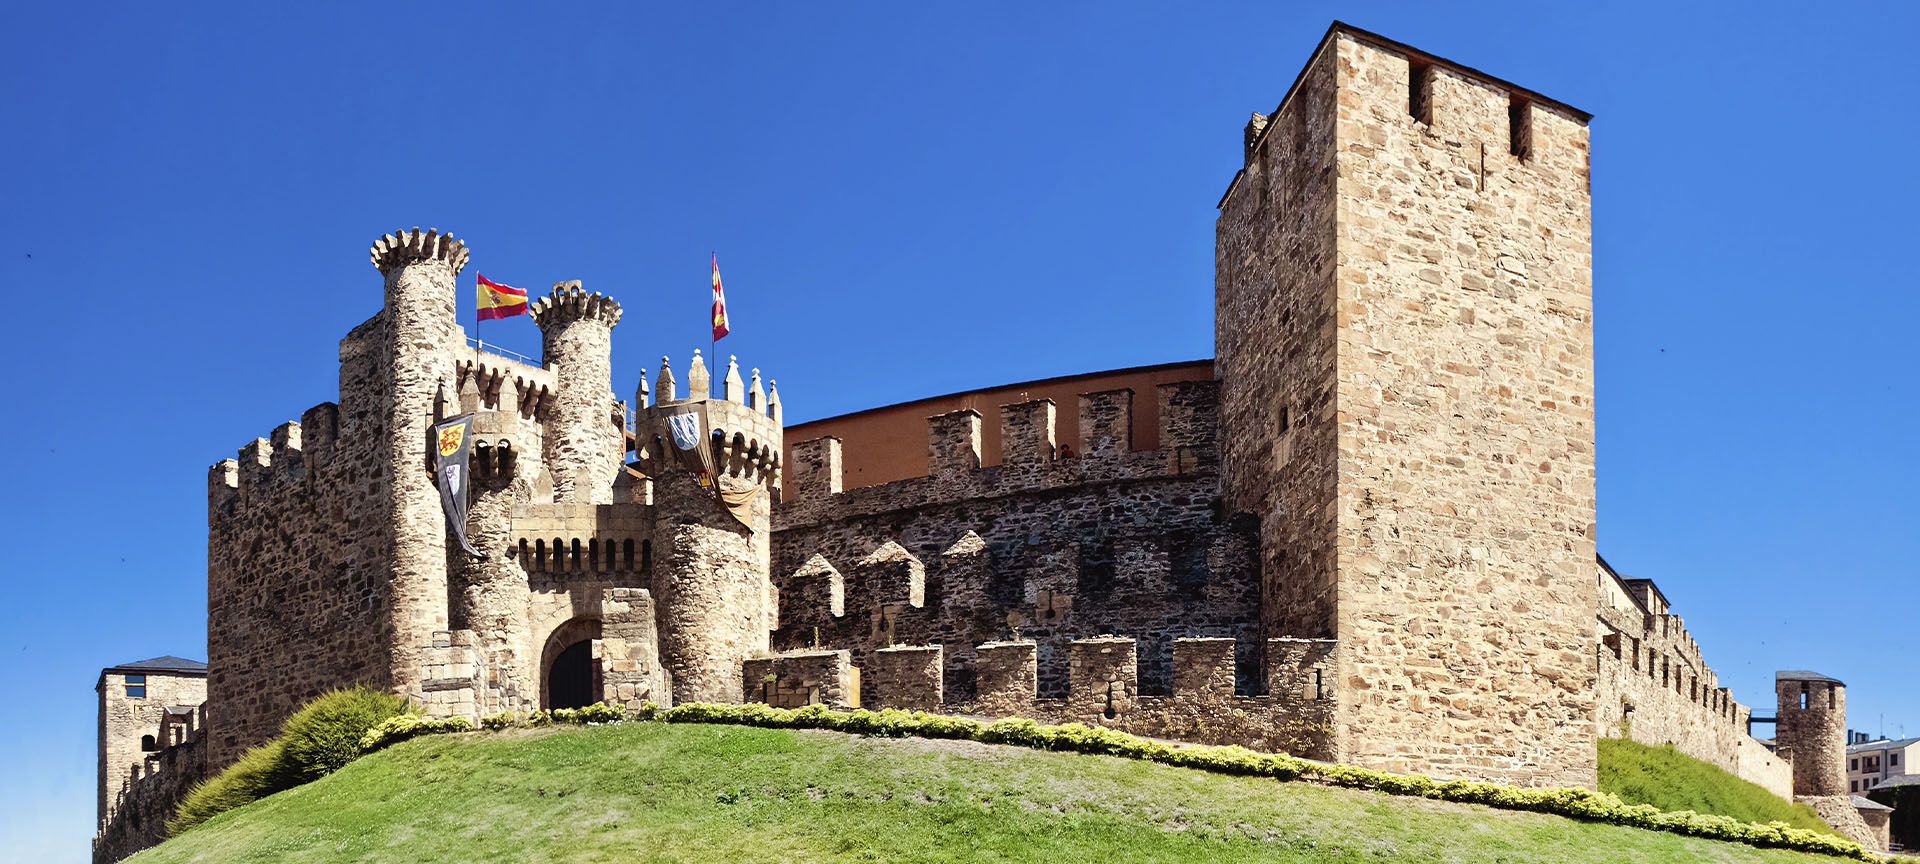 Guided visit to the Castle of the Templars of Ponferrada. But also its walls keep mysteries of more than 800 years, do you know what the cave of the mora is? And the cross of Tau?